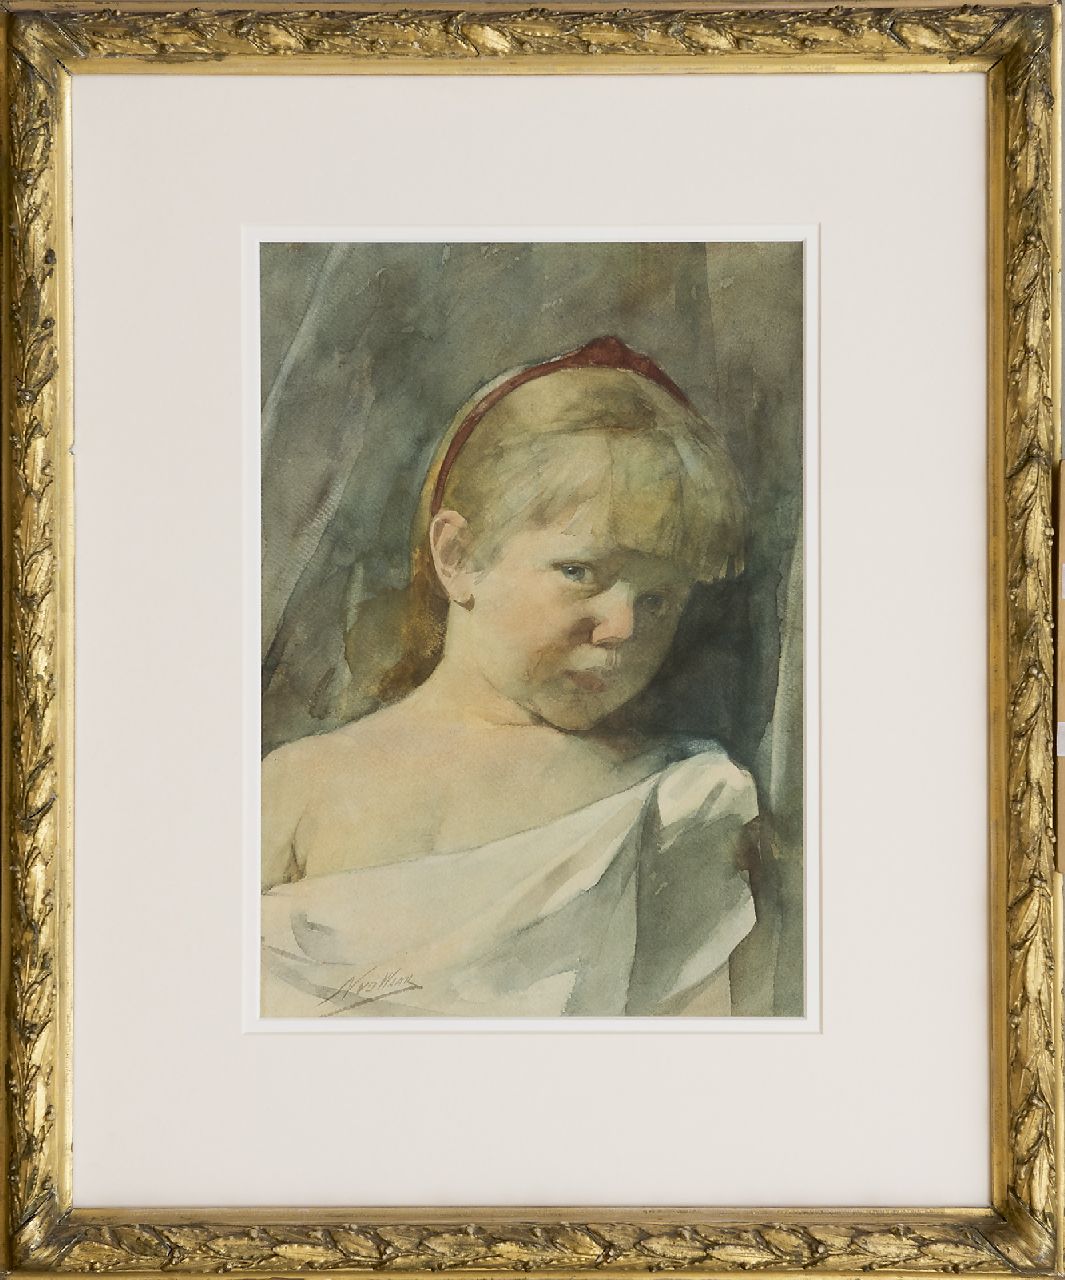 Waay N. van der | Nicolaas van der Waay | Watercolours and drawings offered for sale | A girl's portrait, watercolour on paper 49.5 x 34.3 cm, signed l.l.